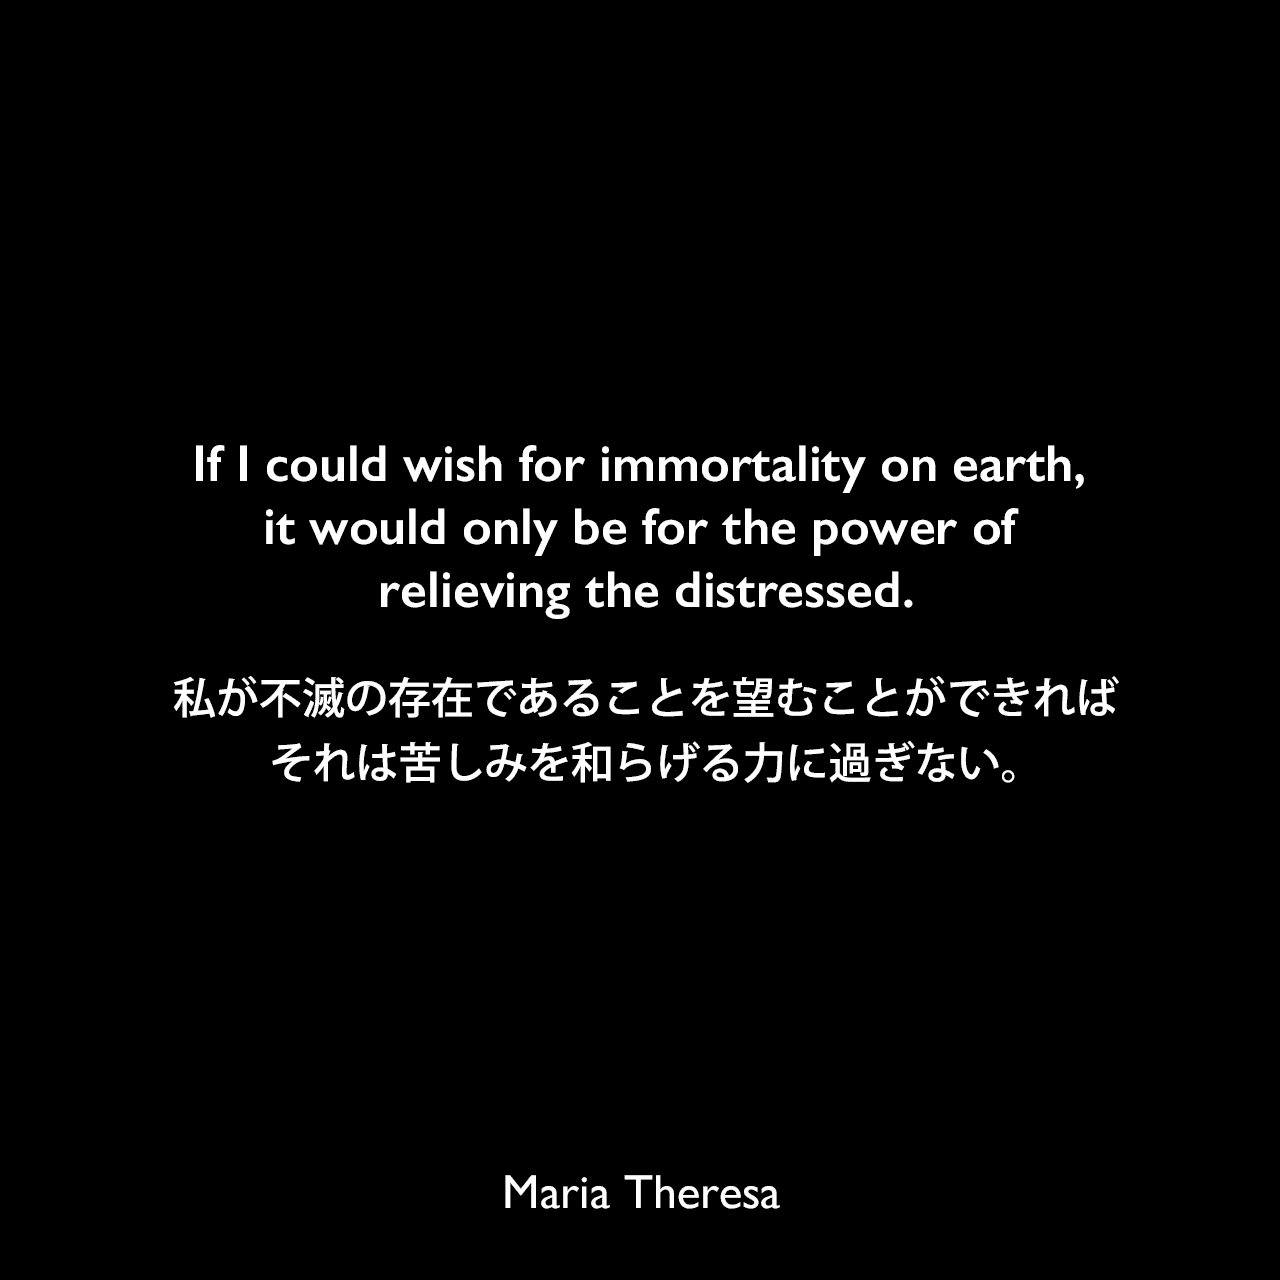 If I could wish for immortality on earth, it would only be for the power of relieving the distressed.私が不滅の存在であることを望むことができれば、それは苦しみを和らげる力に過ぎない。Maria Theresa